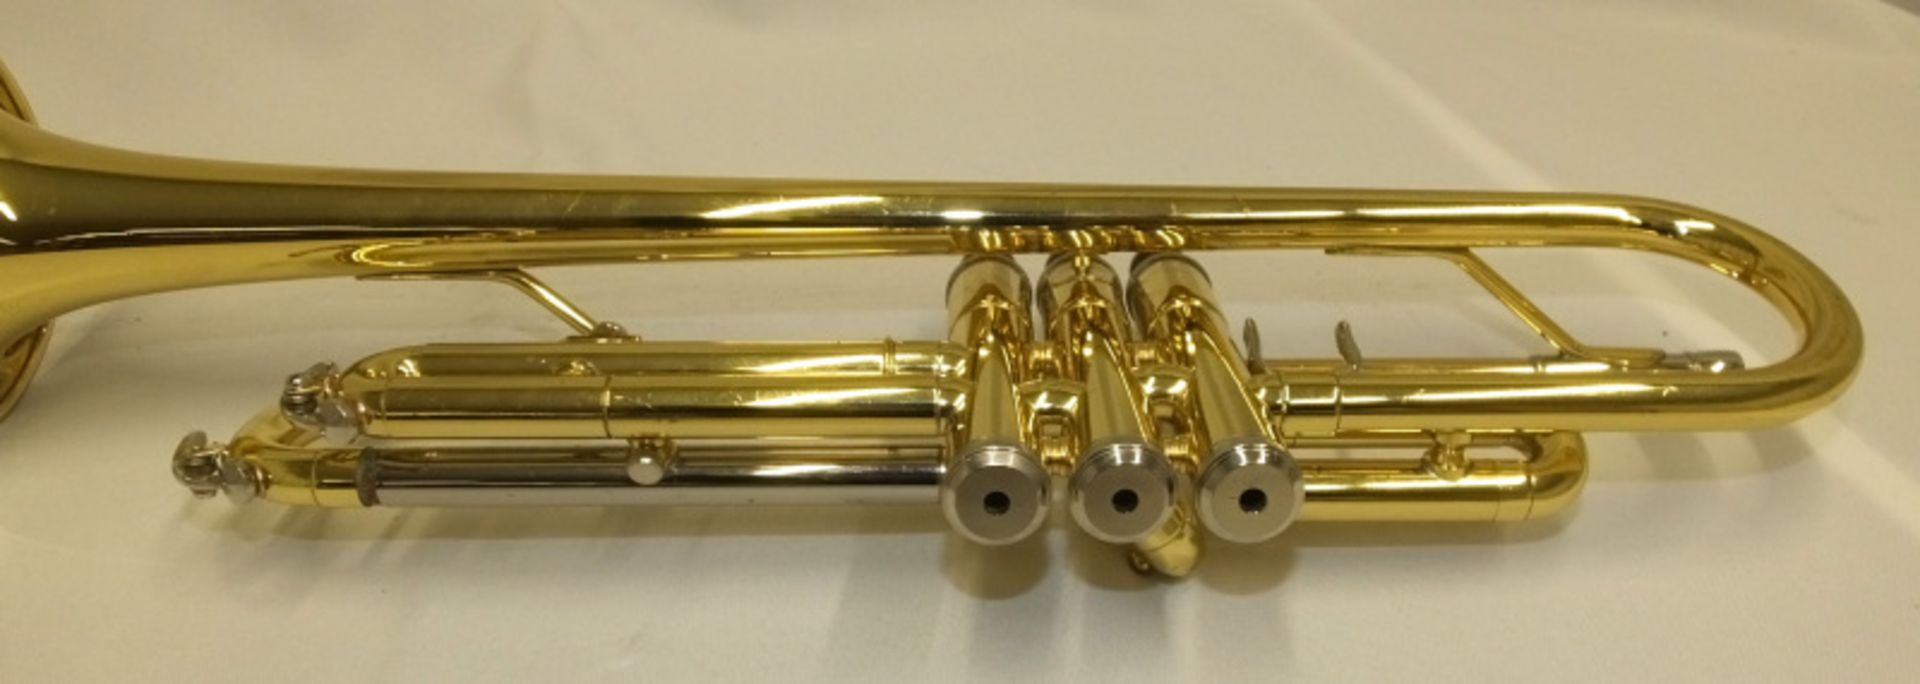 Yamaha YTR 2320E Trumpet in case - serial number 313785 - Please check photos carefully - Image 5 of 14